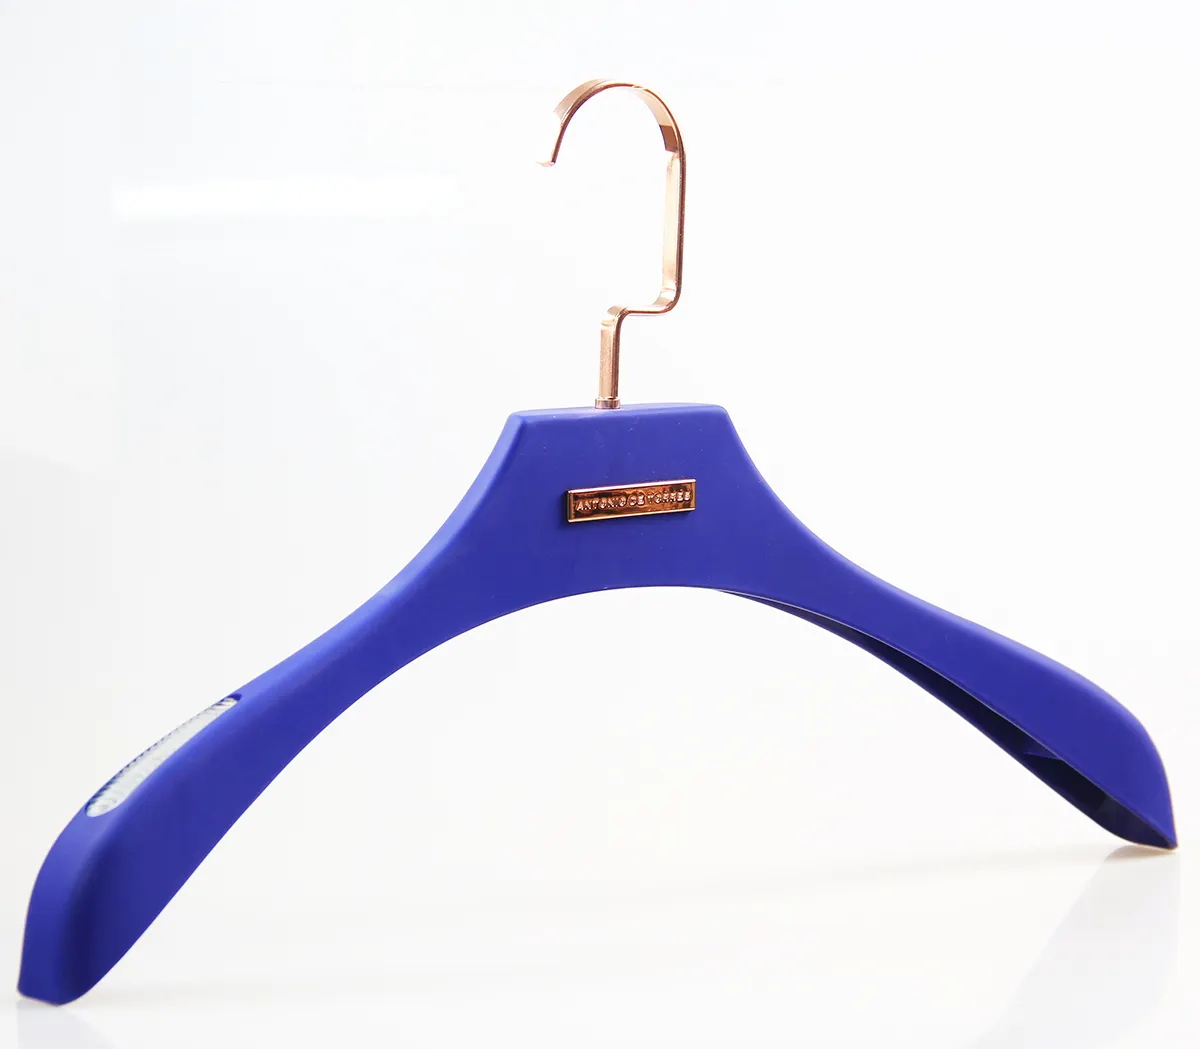 YT 2023 bright blue anti-slip rubber coat hanger plastic cloth hanger for shirt and jacket with exquisite metal customized logo